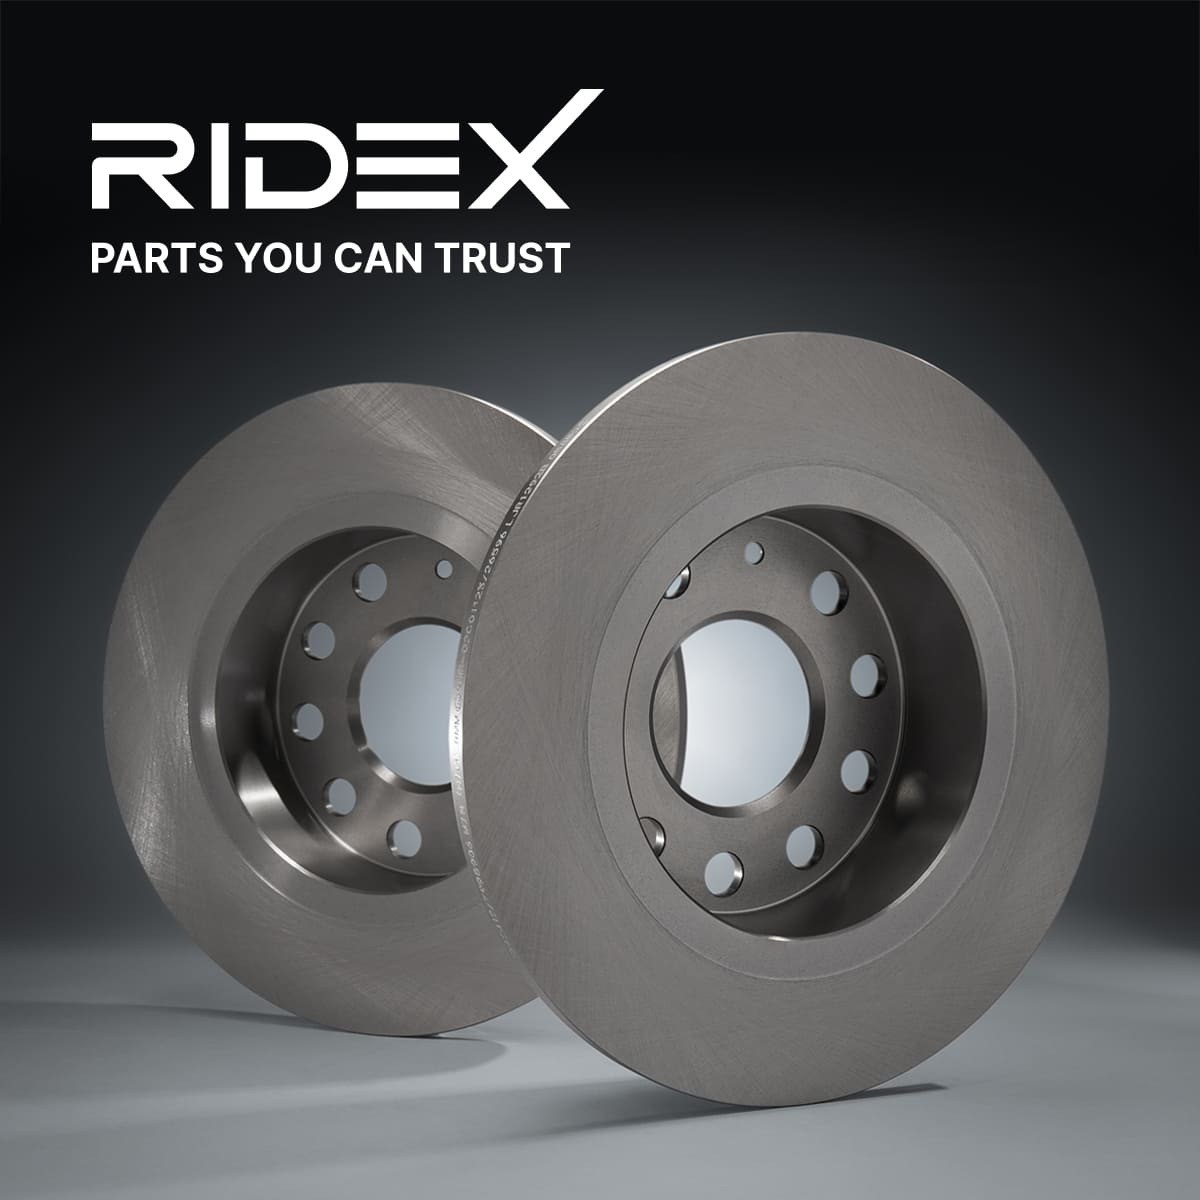 82B0245 Brake discs 82B0245 RIDEX Front Axle, 258x21,0mm, 4x100, internally vented, Uncoated